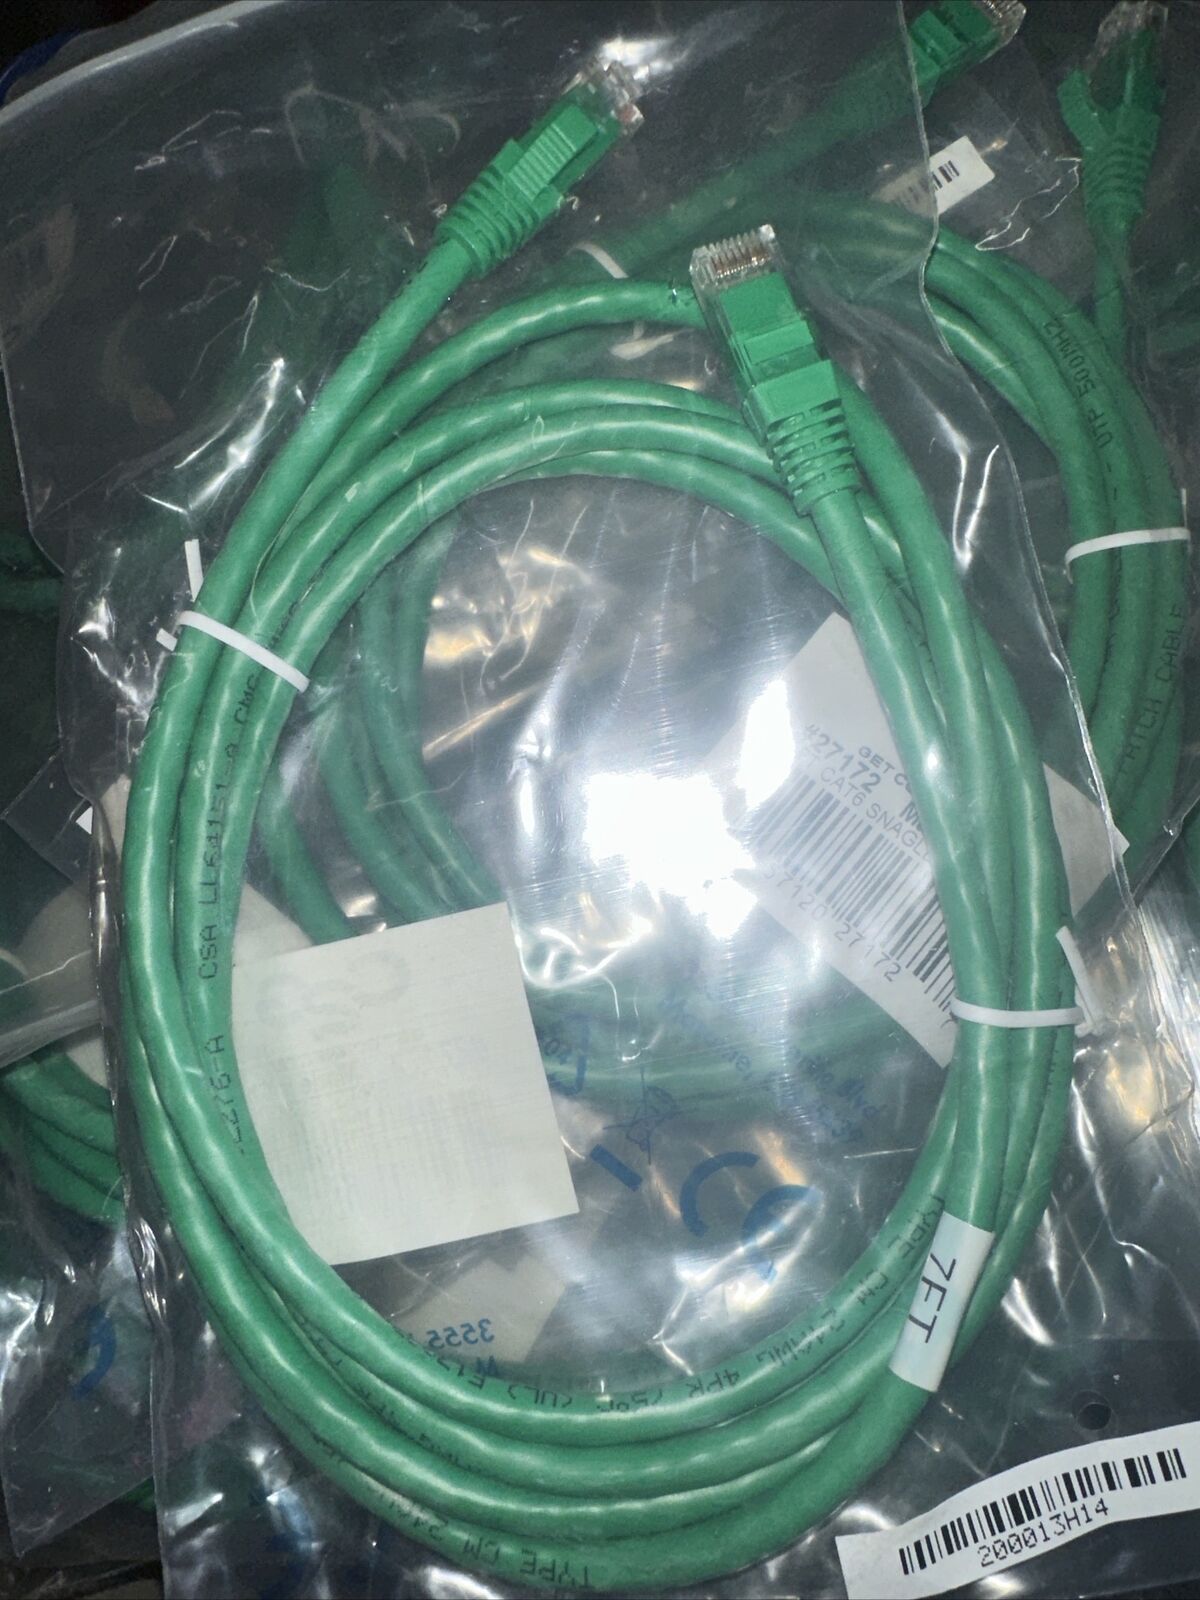 LOT OF 80 - New 7ft Cat6 Snagless Green Ethernet Cables